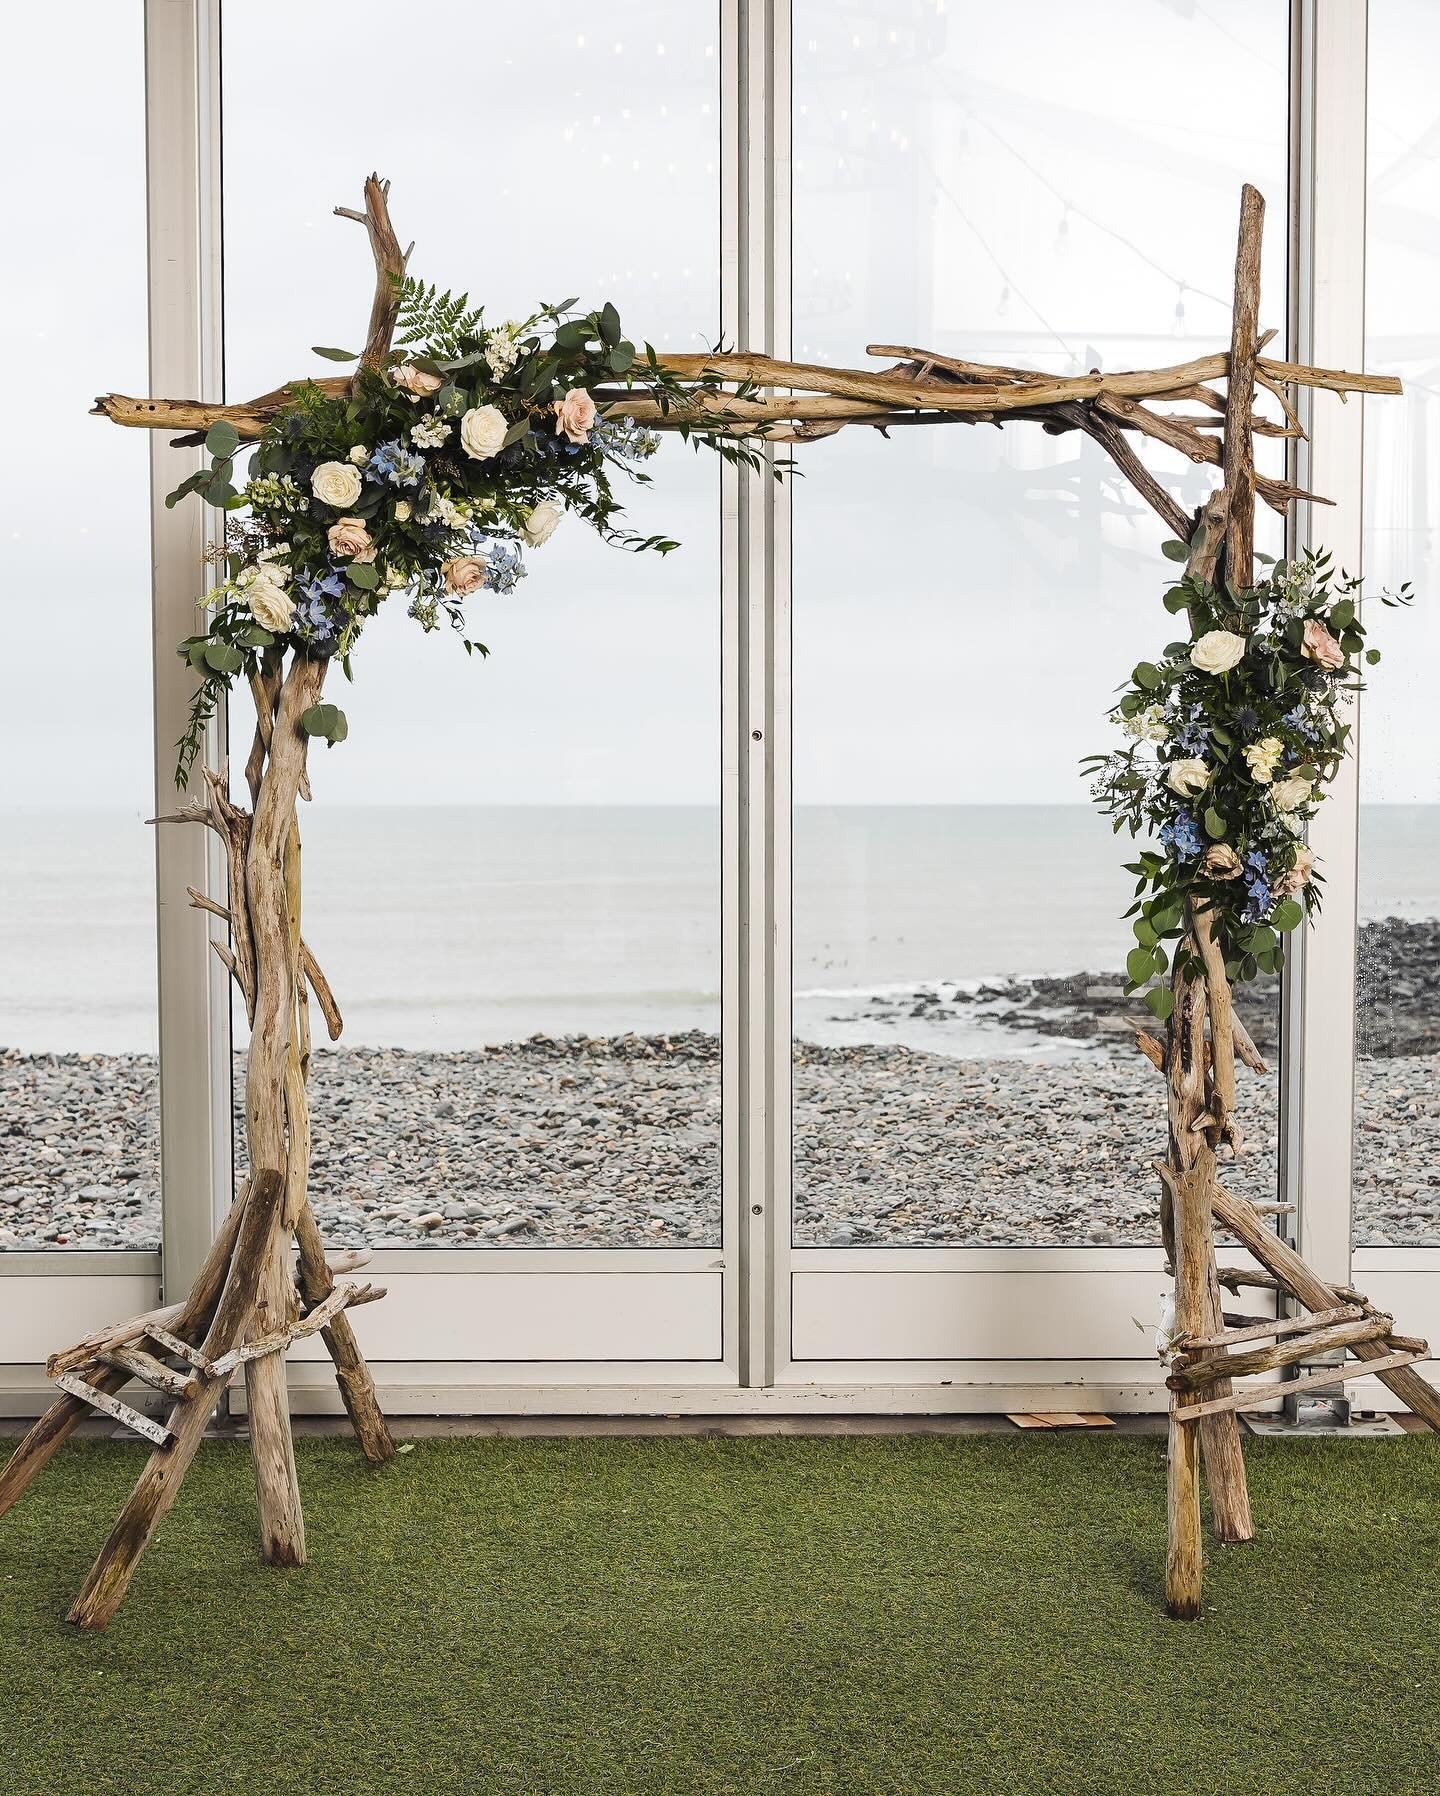 The bride wanted the classic white and blue vibe for her wedding as it was on the water! But for the ceremony she wanted to add a pop of blush! I thought it was a fabulous idea! I really loved designing on this iconic beautiful beachy driftwood arch 